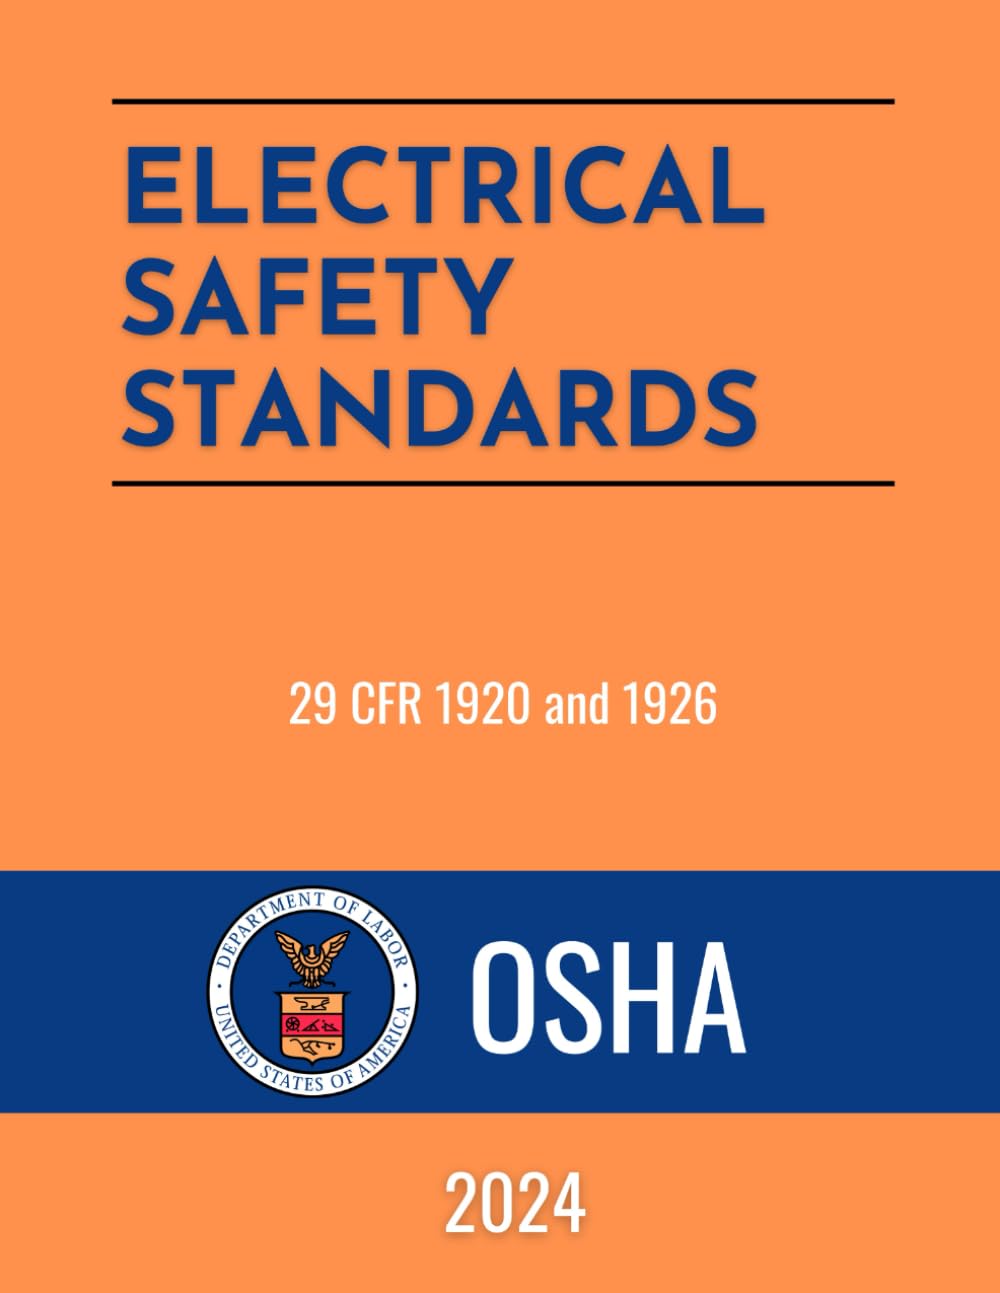 OSHA Electrical Safety Standards: 29 CFR 1910 and 1926